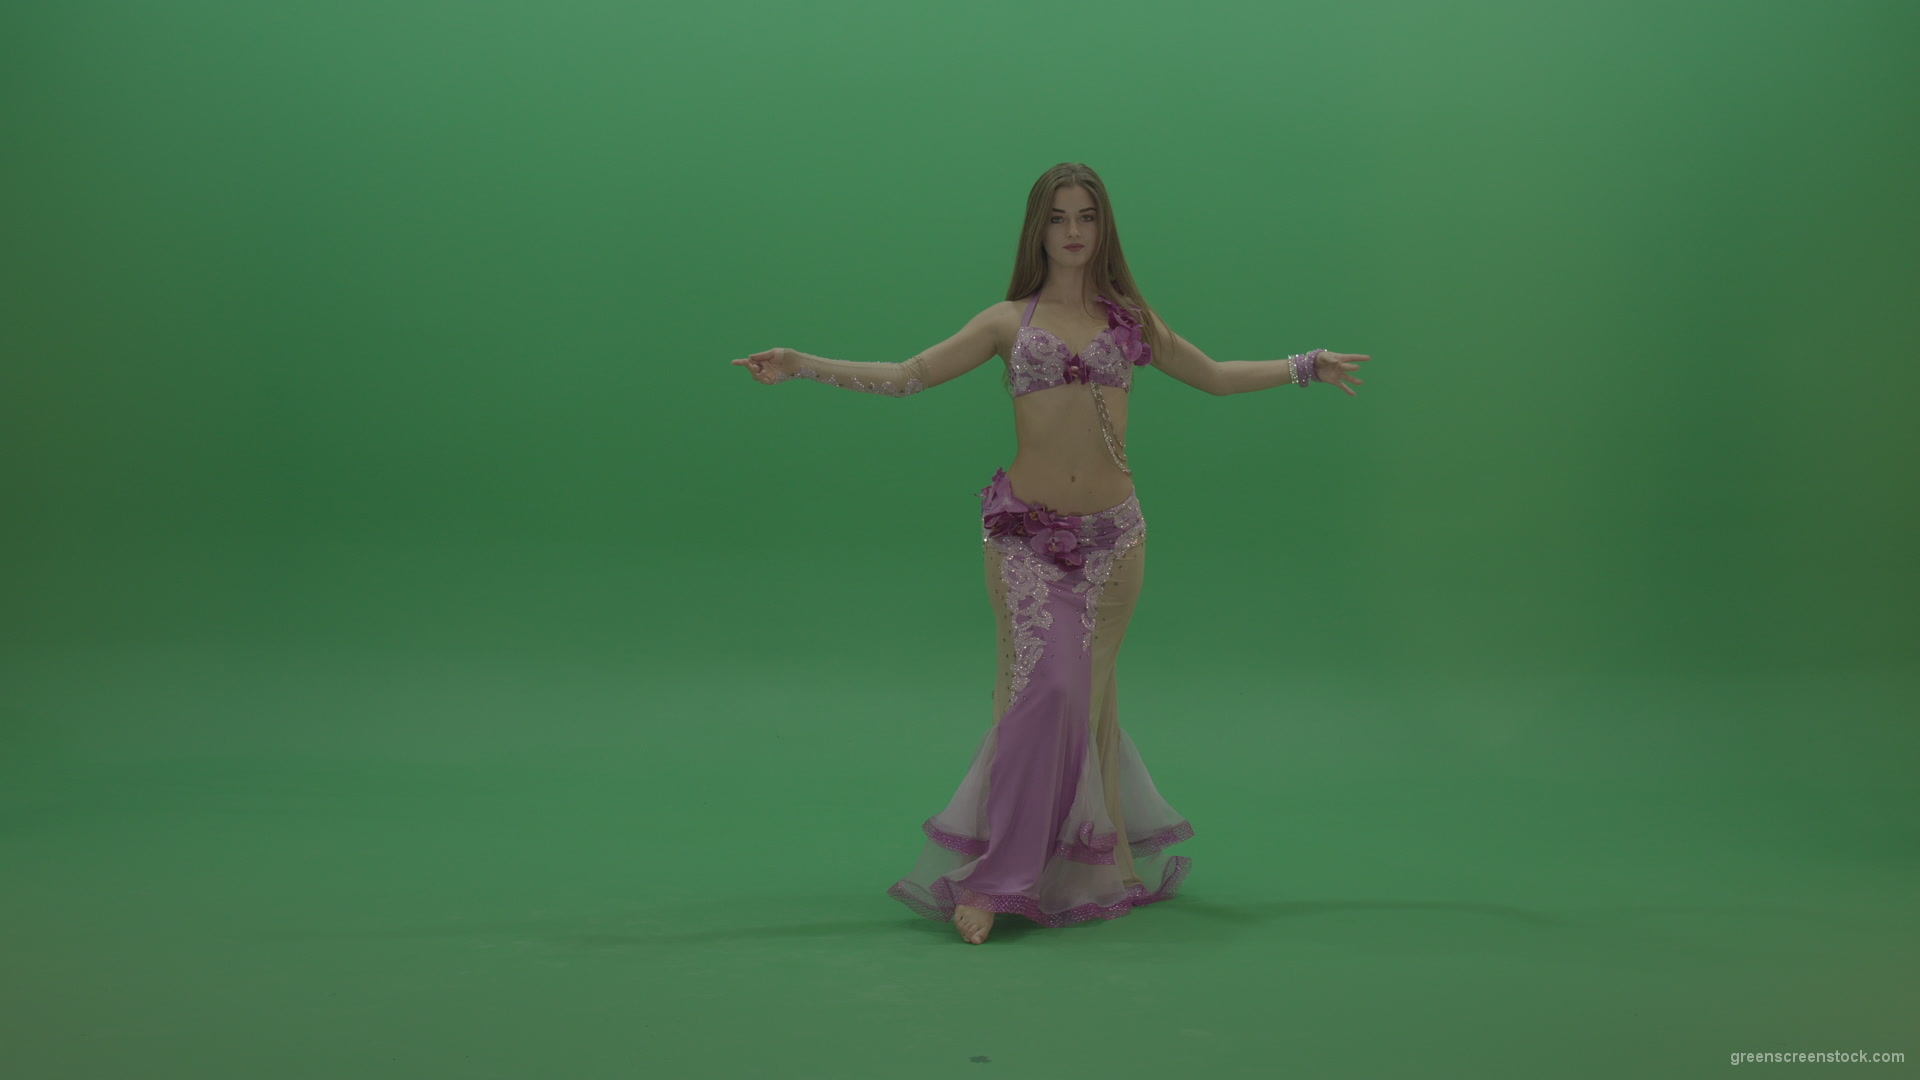 Sightly-belly-dancer-in-pink-wear-display-amazing-dance-moves-over-chromakey-background_001 Green Screen Stock